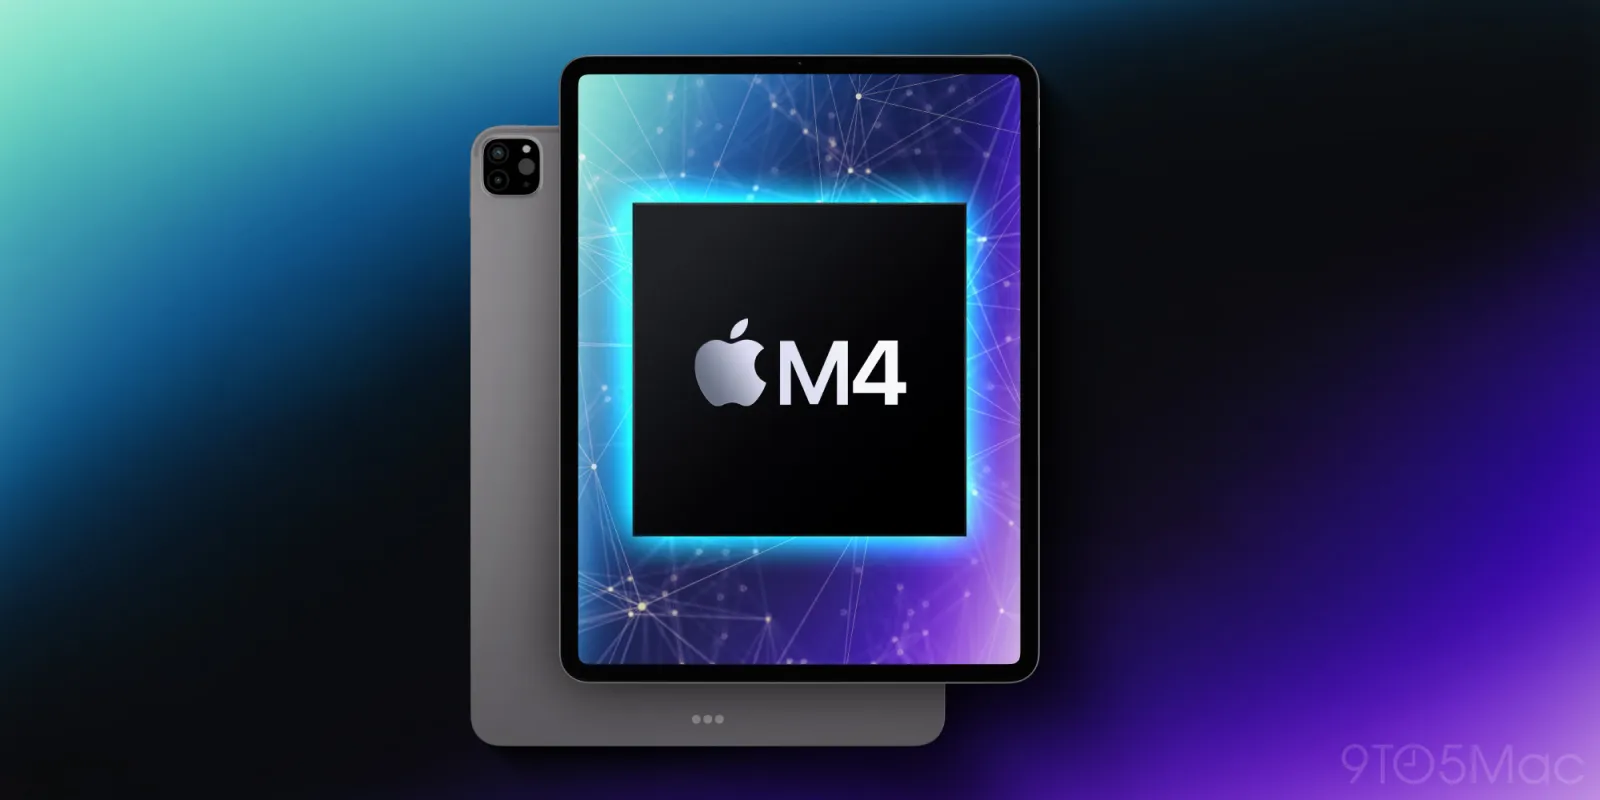 New iPad Pro Set to Launch with Apple's Latest M4 Chip: What You Need to Know About the Game-Changing Upgrade